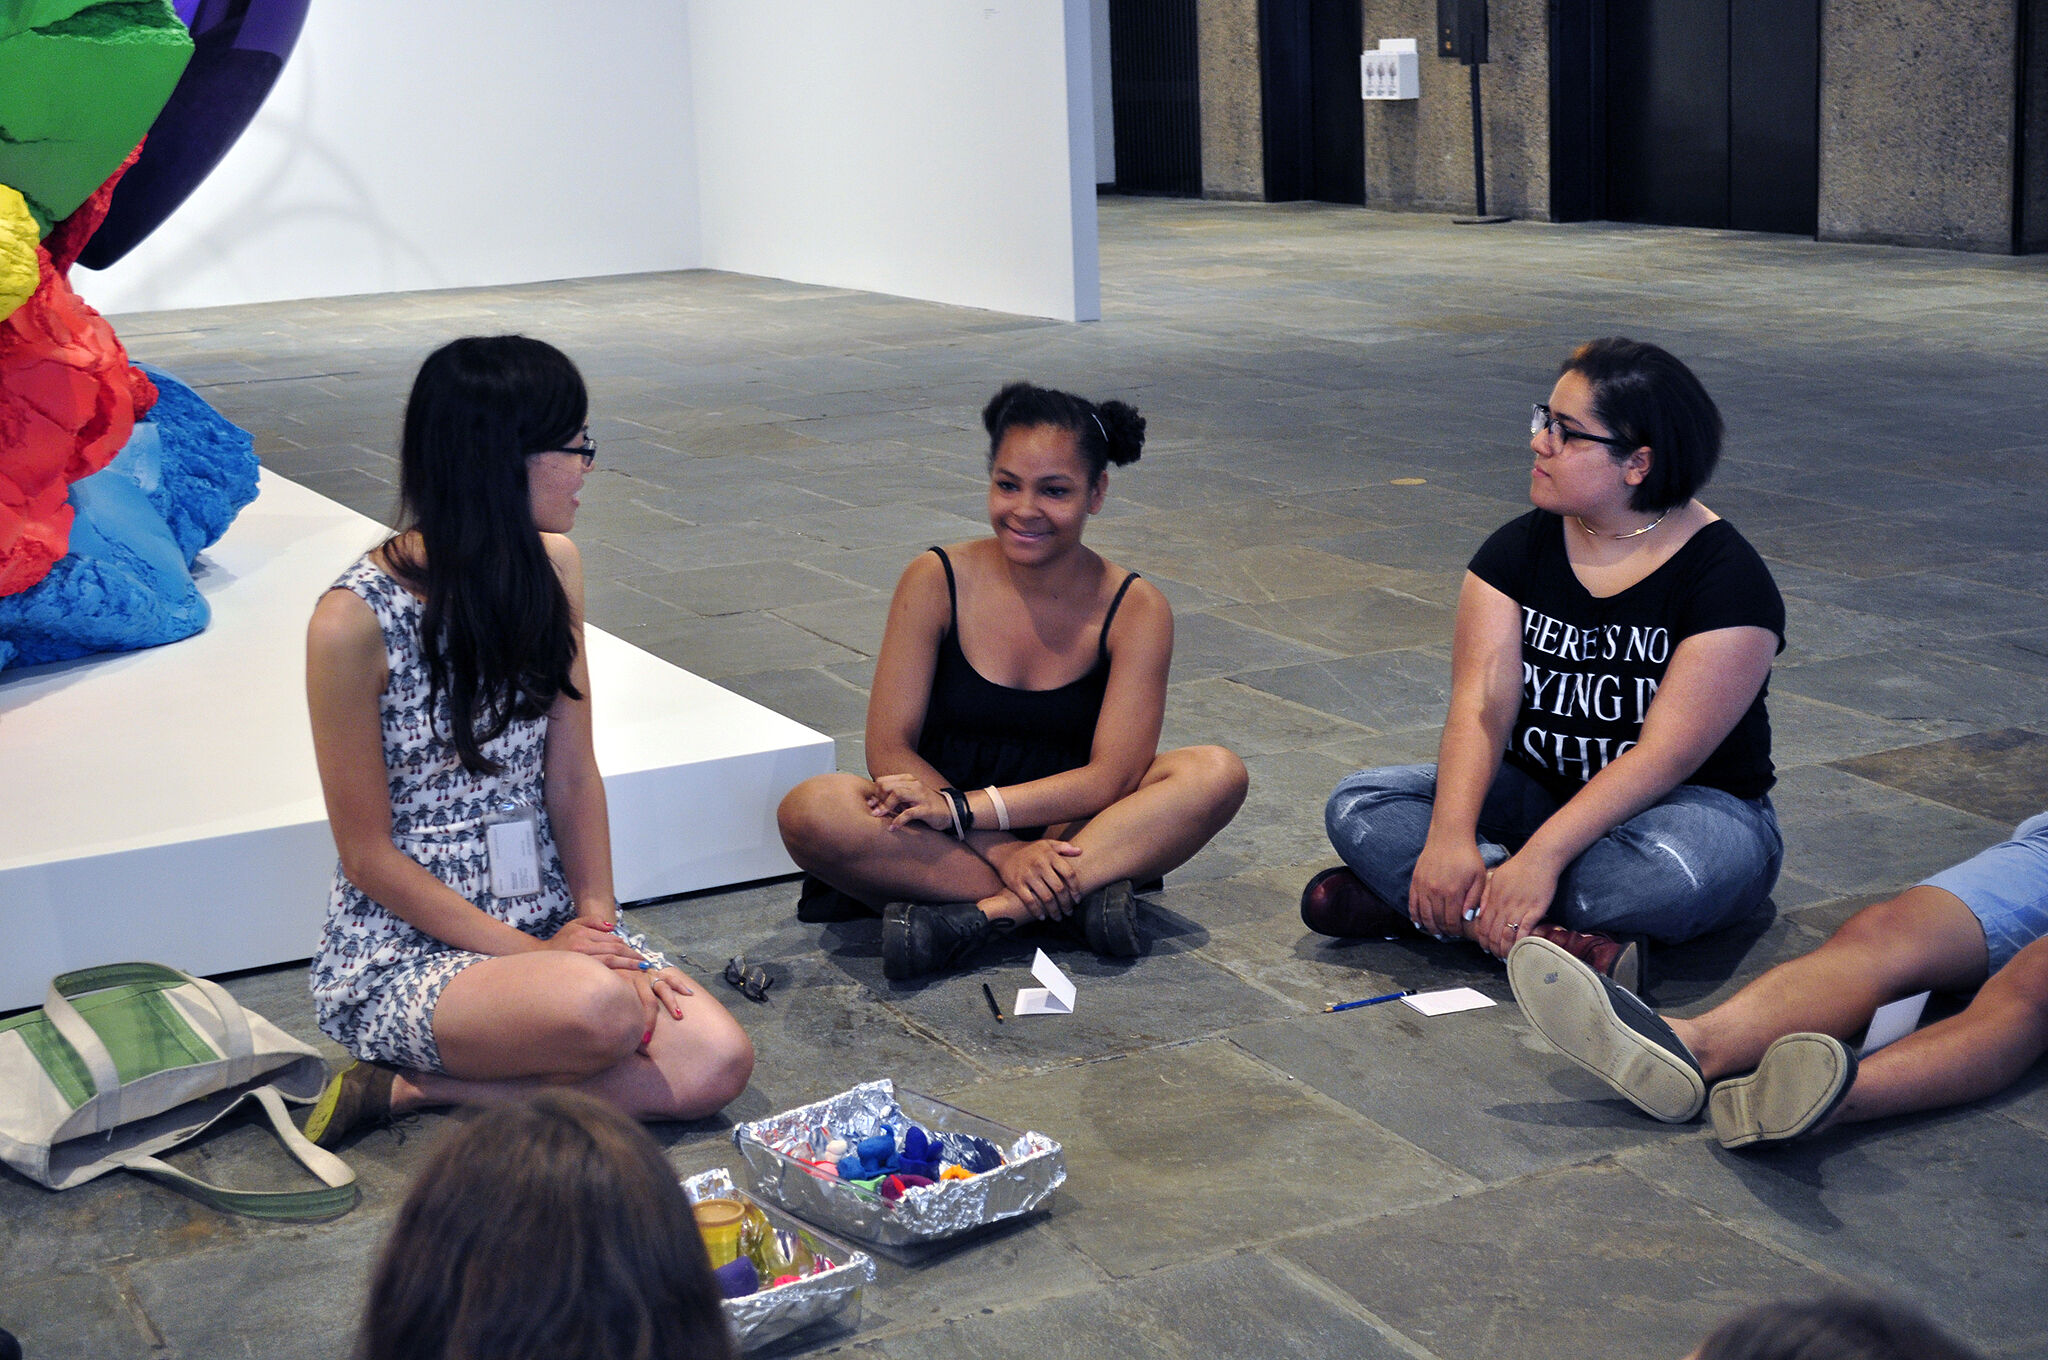 Teens in discussion on the floor.